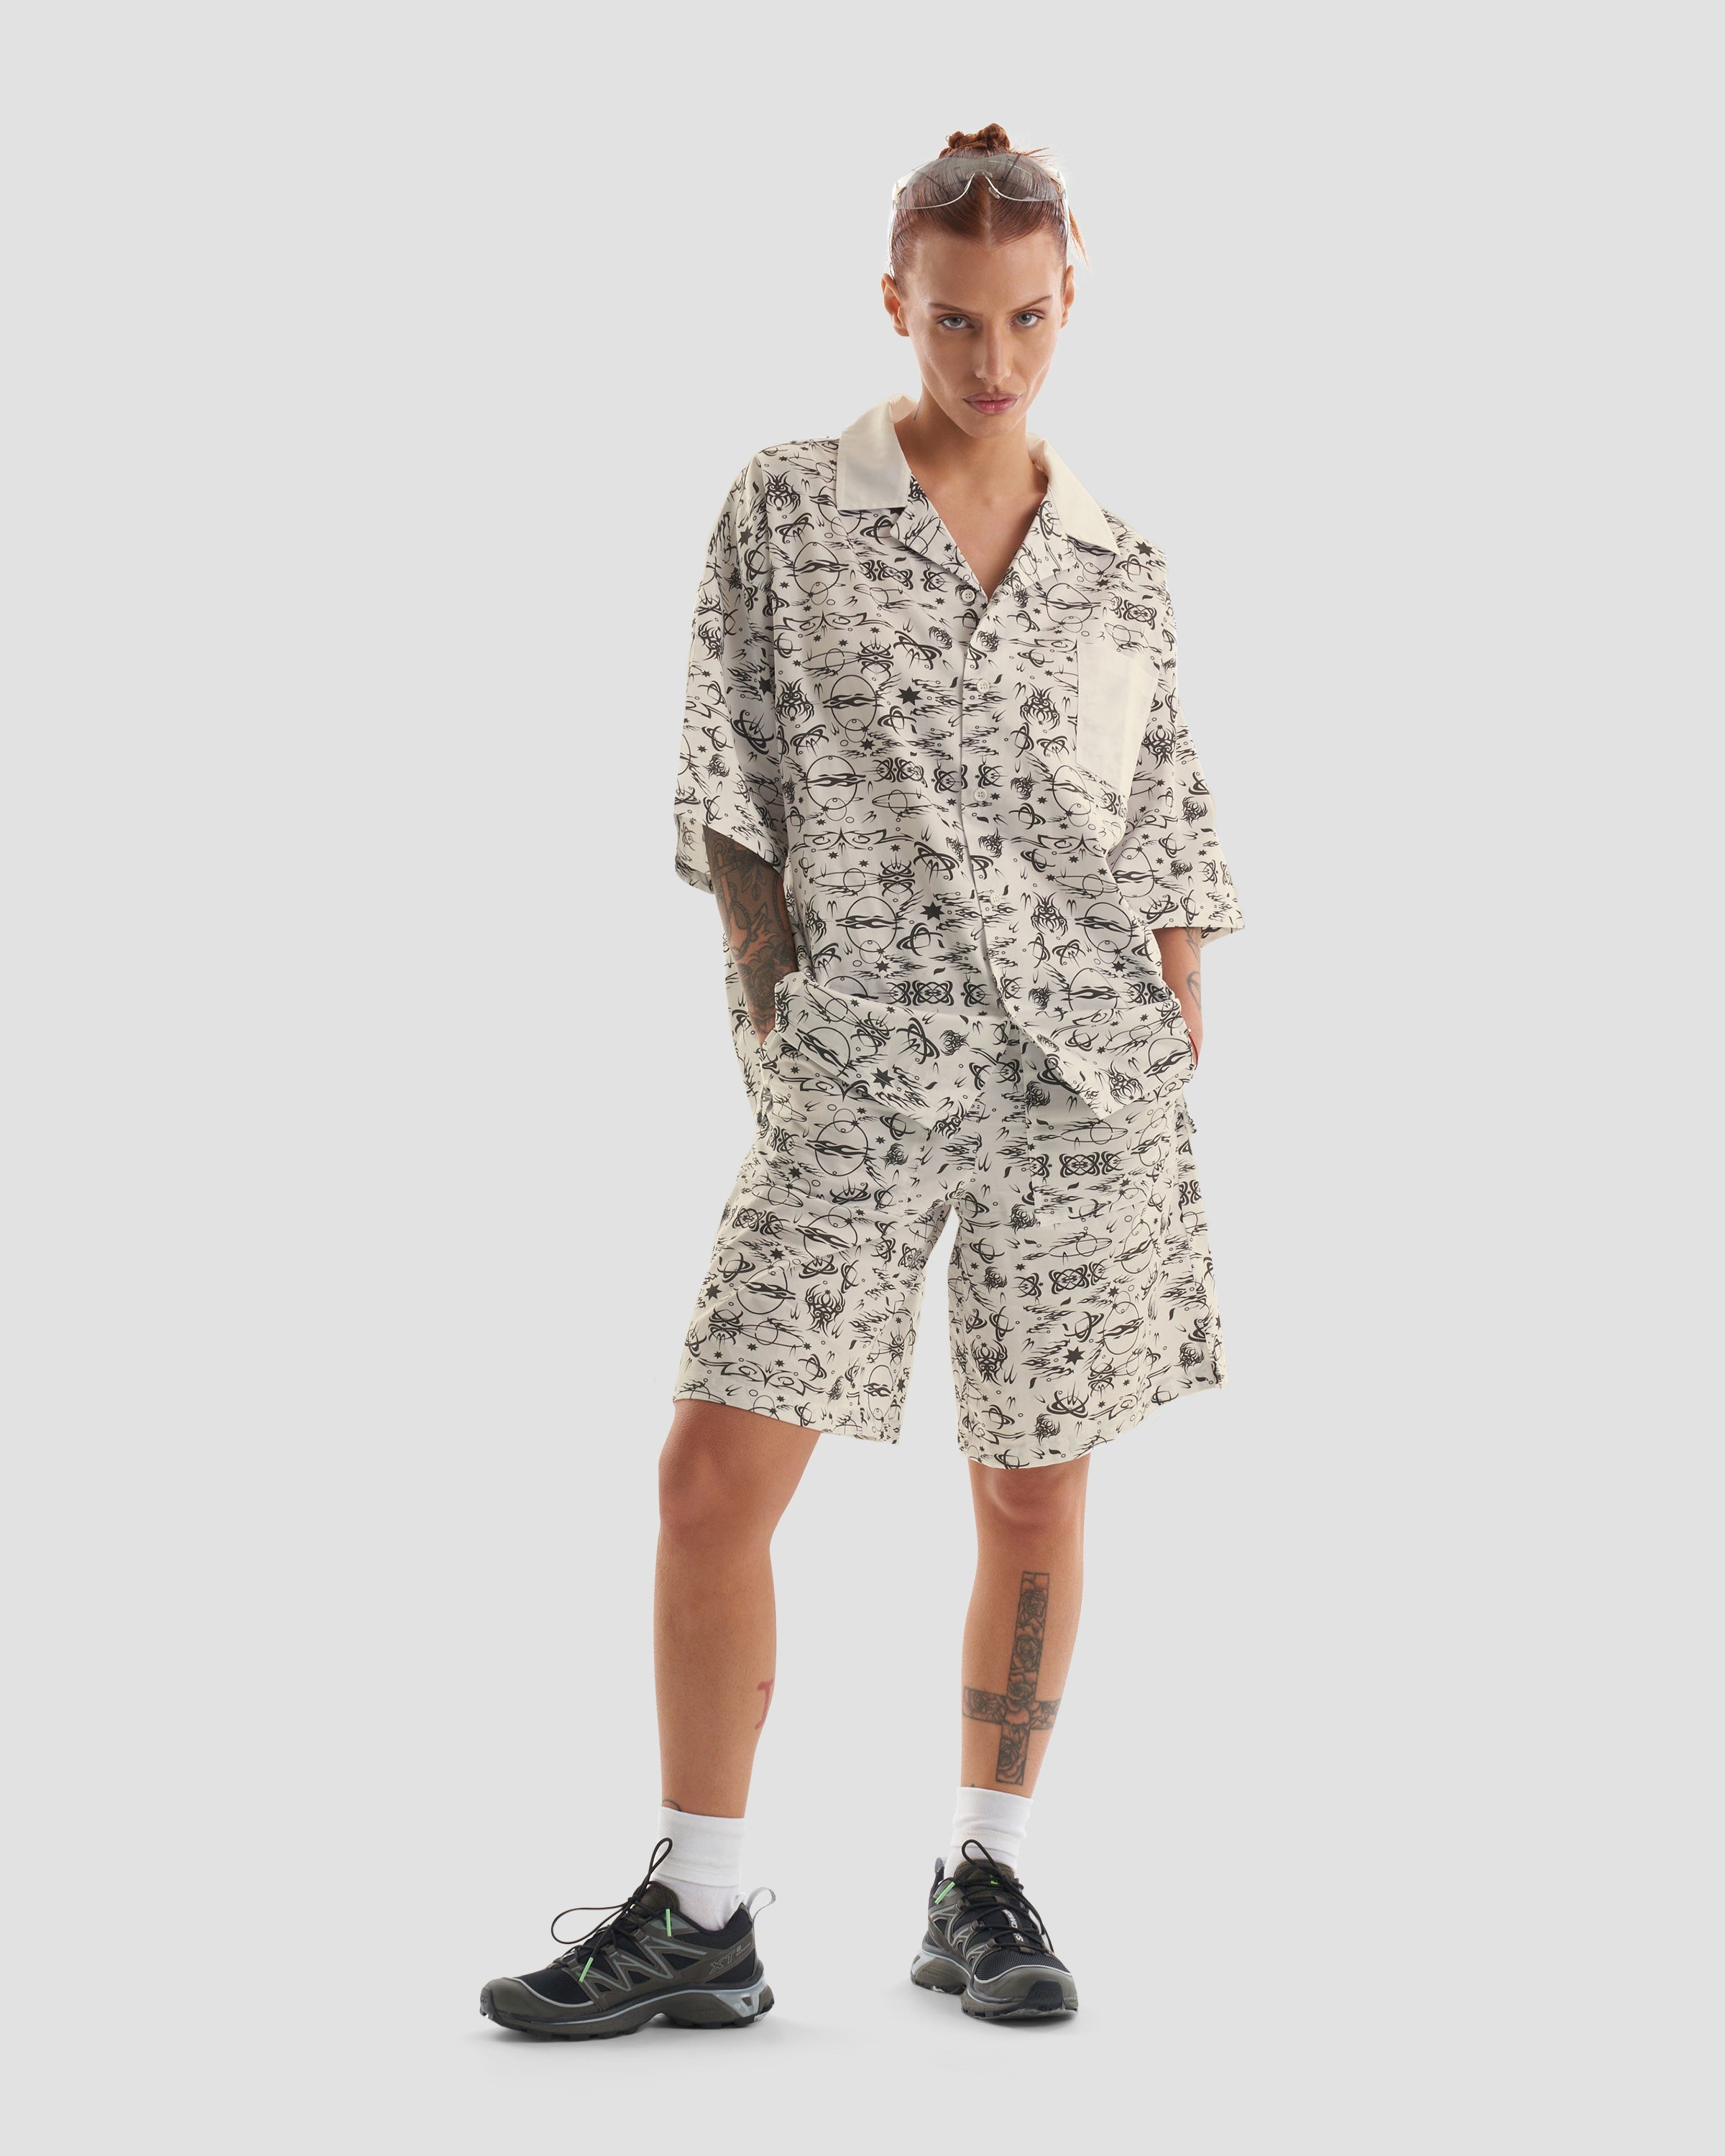 No Regrets Oversized Short Sleeve Shirt with Tattoo Print in Ecru